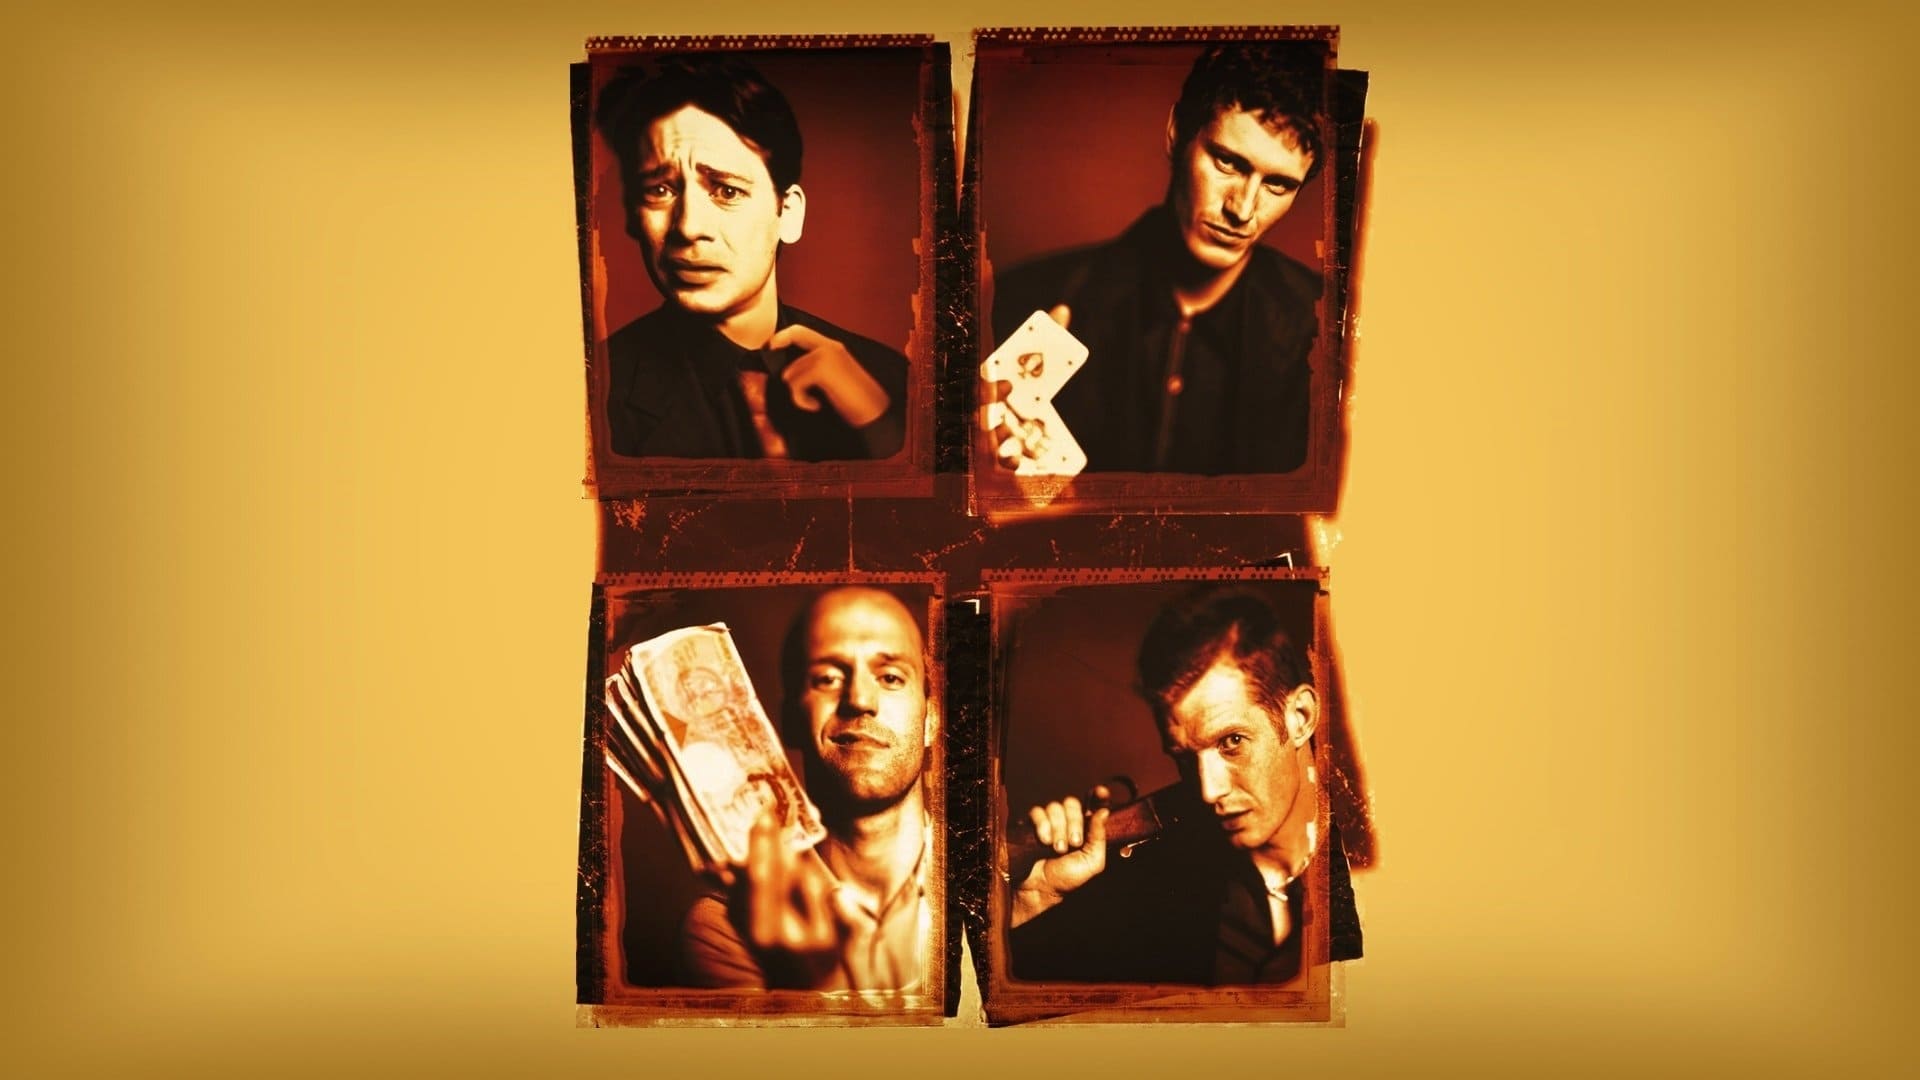 Lock, Stock and Two Smoking Barrels 1998 123movies